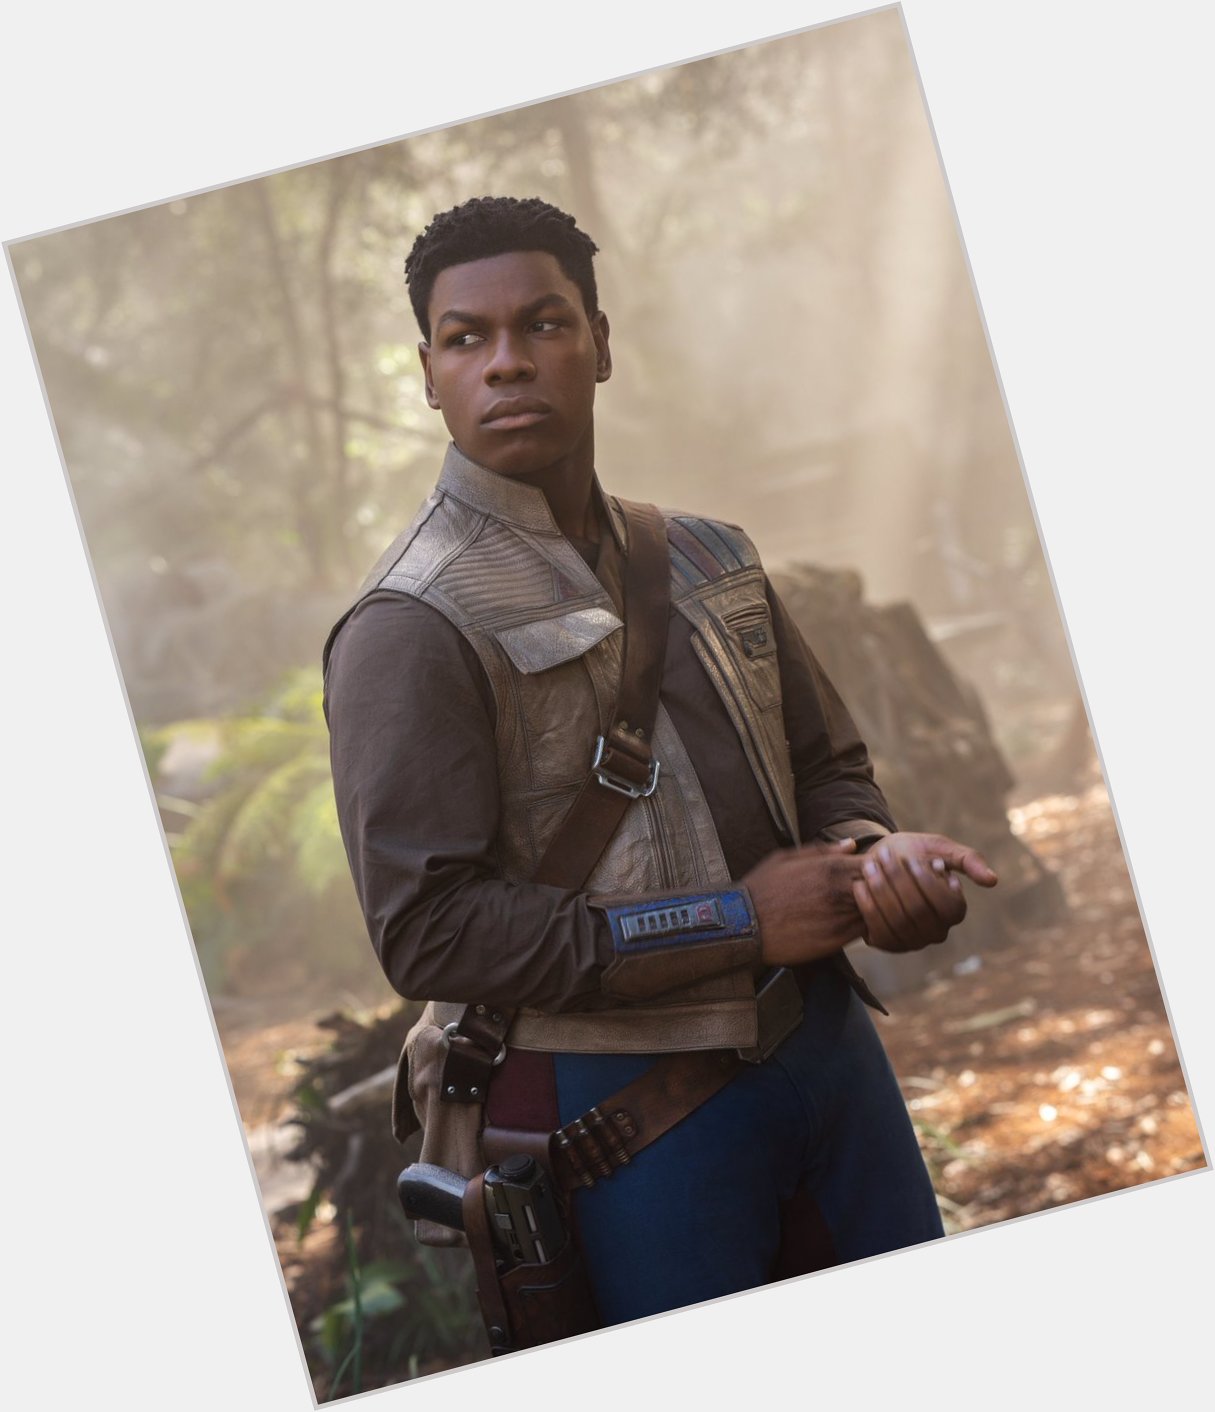 Happy 29th birthday to John Boyega, who played Finn/FN-2187 in the Star Wars sequel trilogy! 